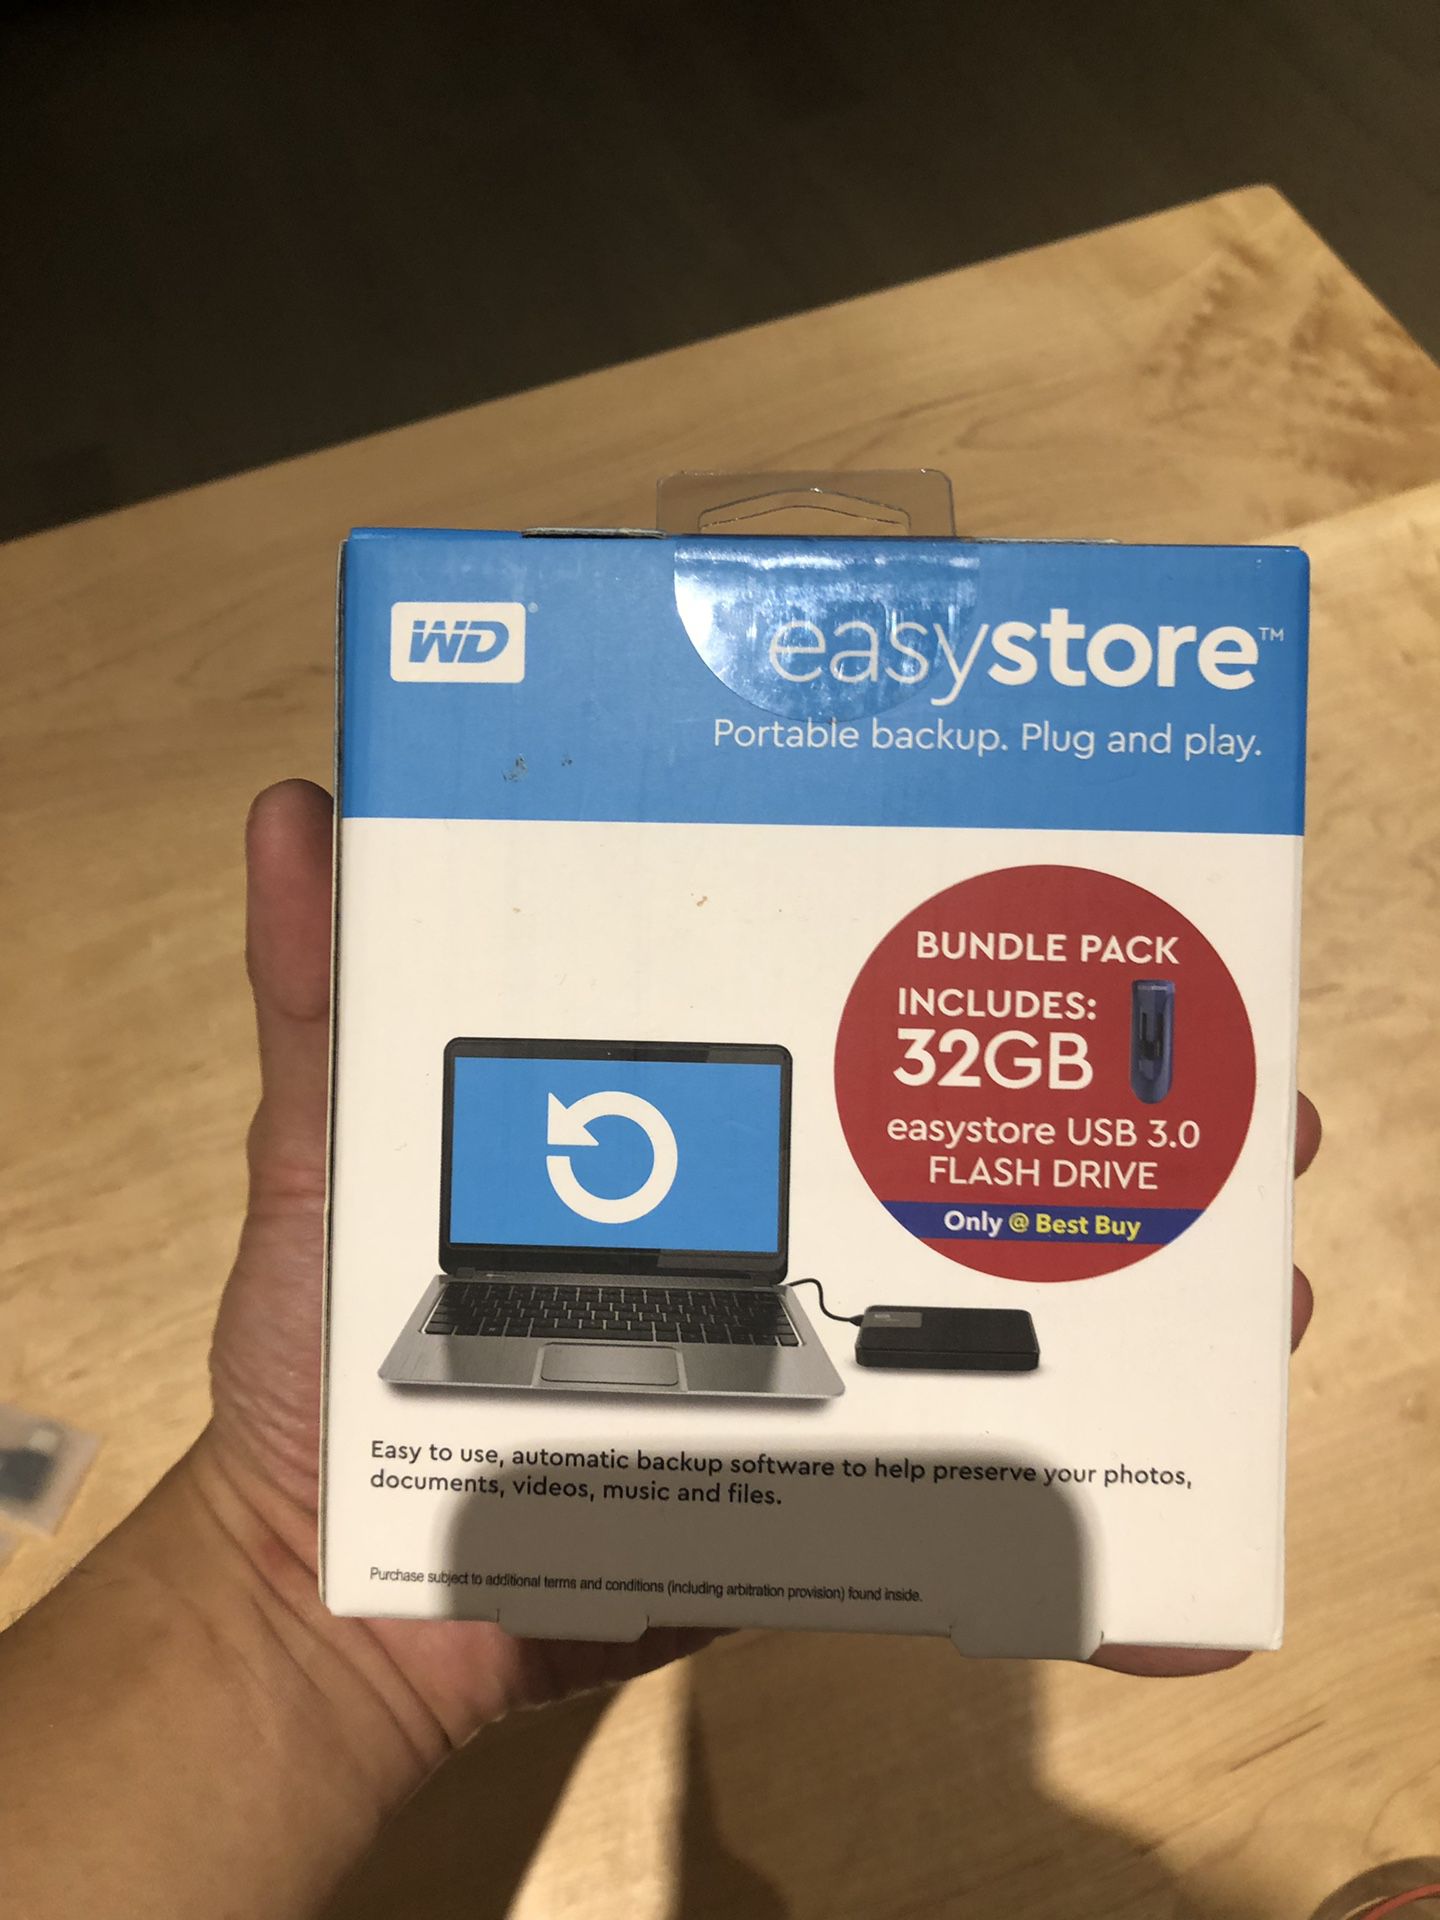 WD Easystore 4TB External USB 3.0 Portable Hard Drive with 32GB Easystore USB Flash Drive